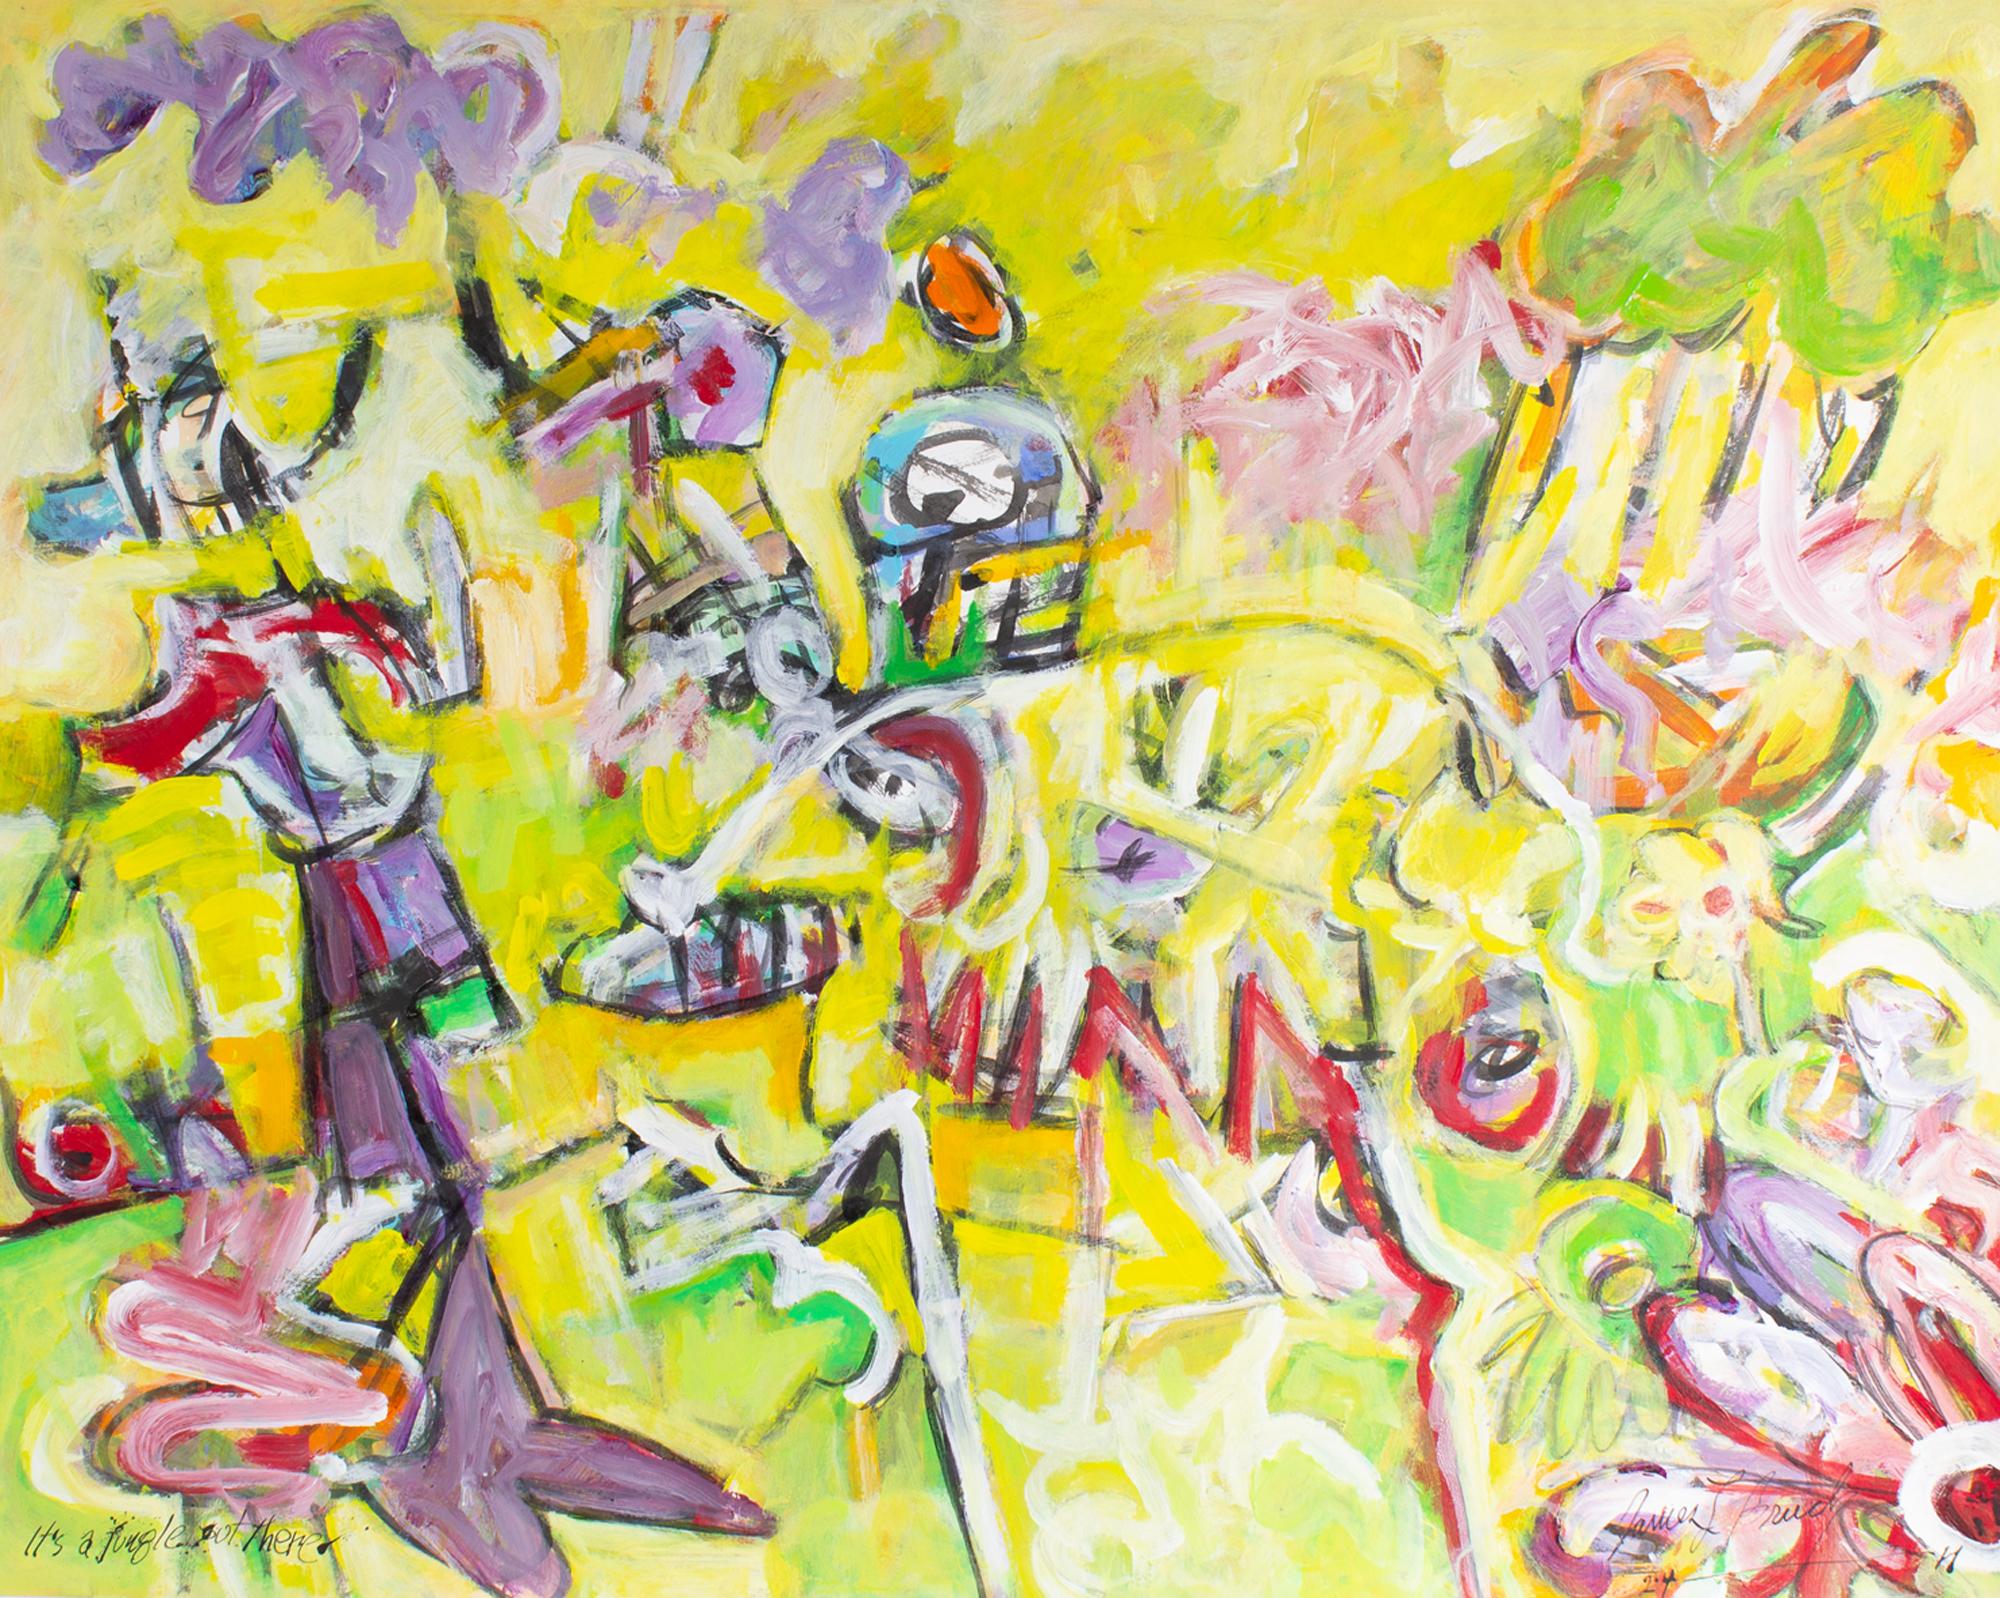 A 2011 acrylic and watercolor painting on paper by the American artist James L. Bruch (1942-2023). Titled It's a Jungle Out There, this abstract work depicts a vibrant landscape filled with green plants and colorful flowers and creatures. Signed and